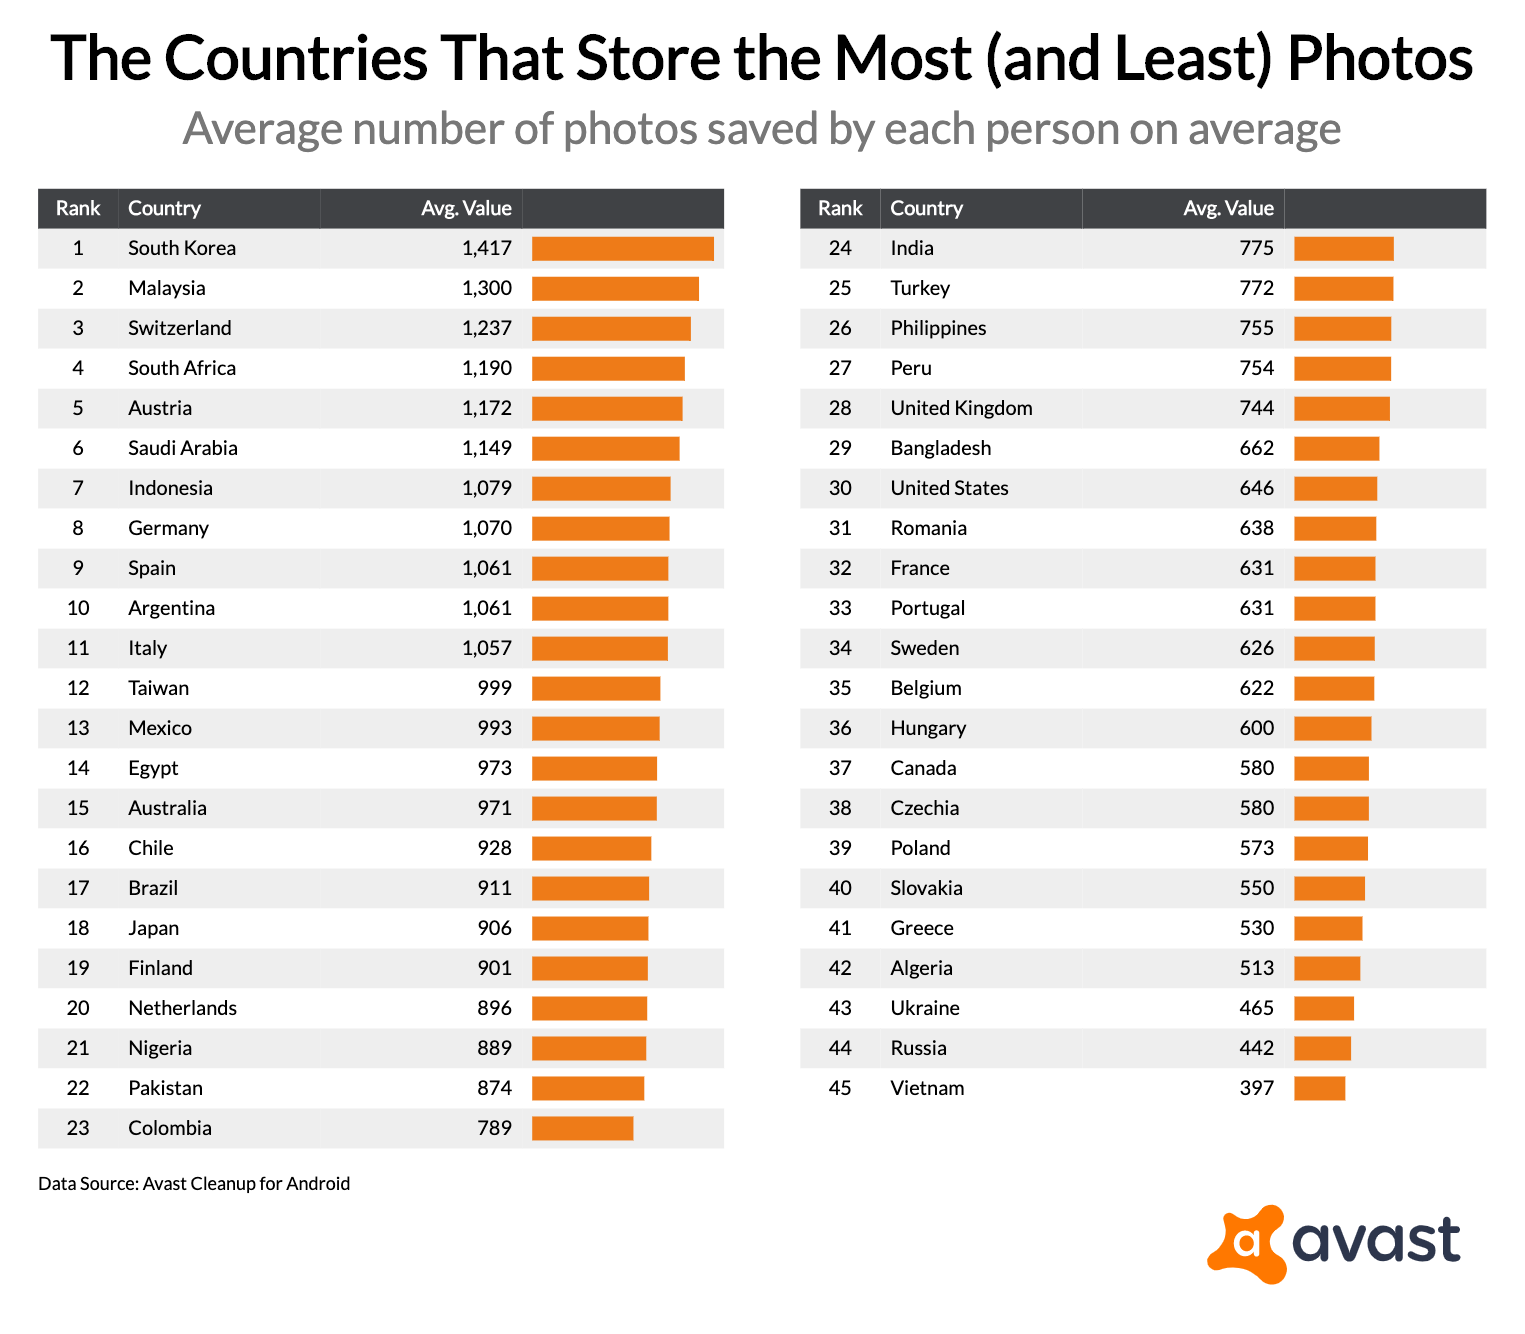 the-countries-that-store-the-most-and-least-photos_2019-09-26T21_17_28.427Z